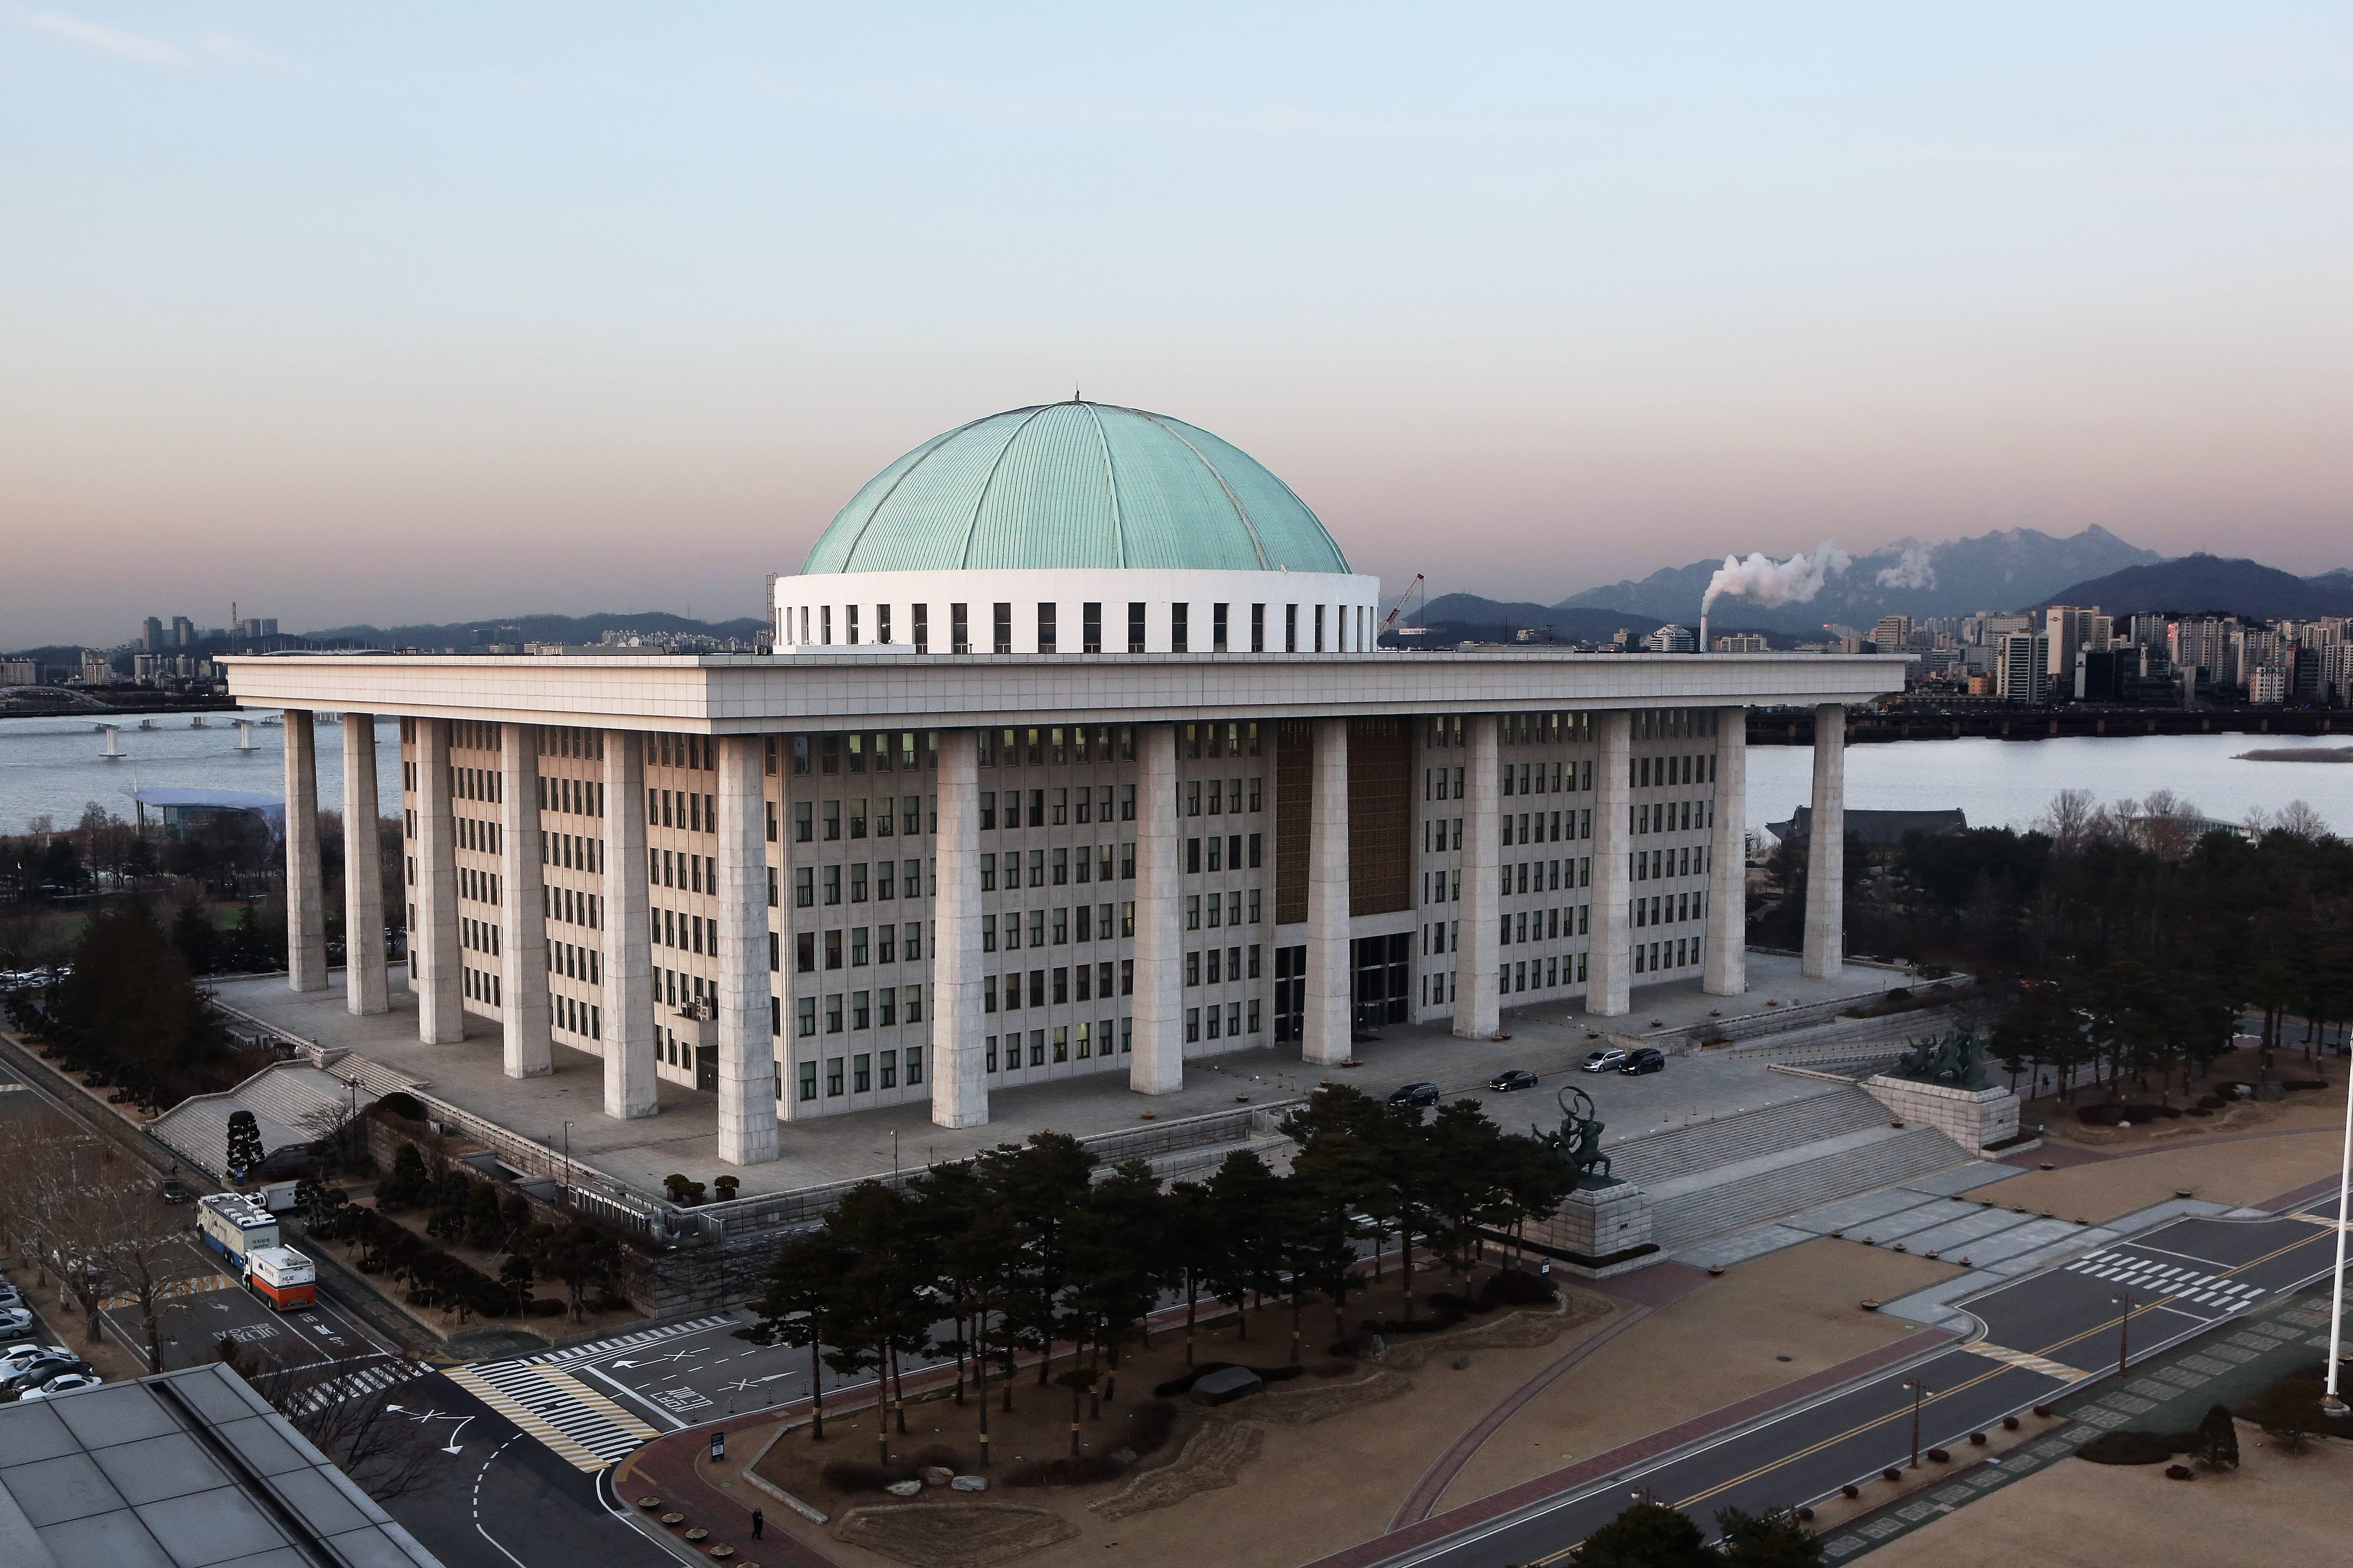 View of the National Assembly Building 관련사진 3 보기